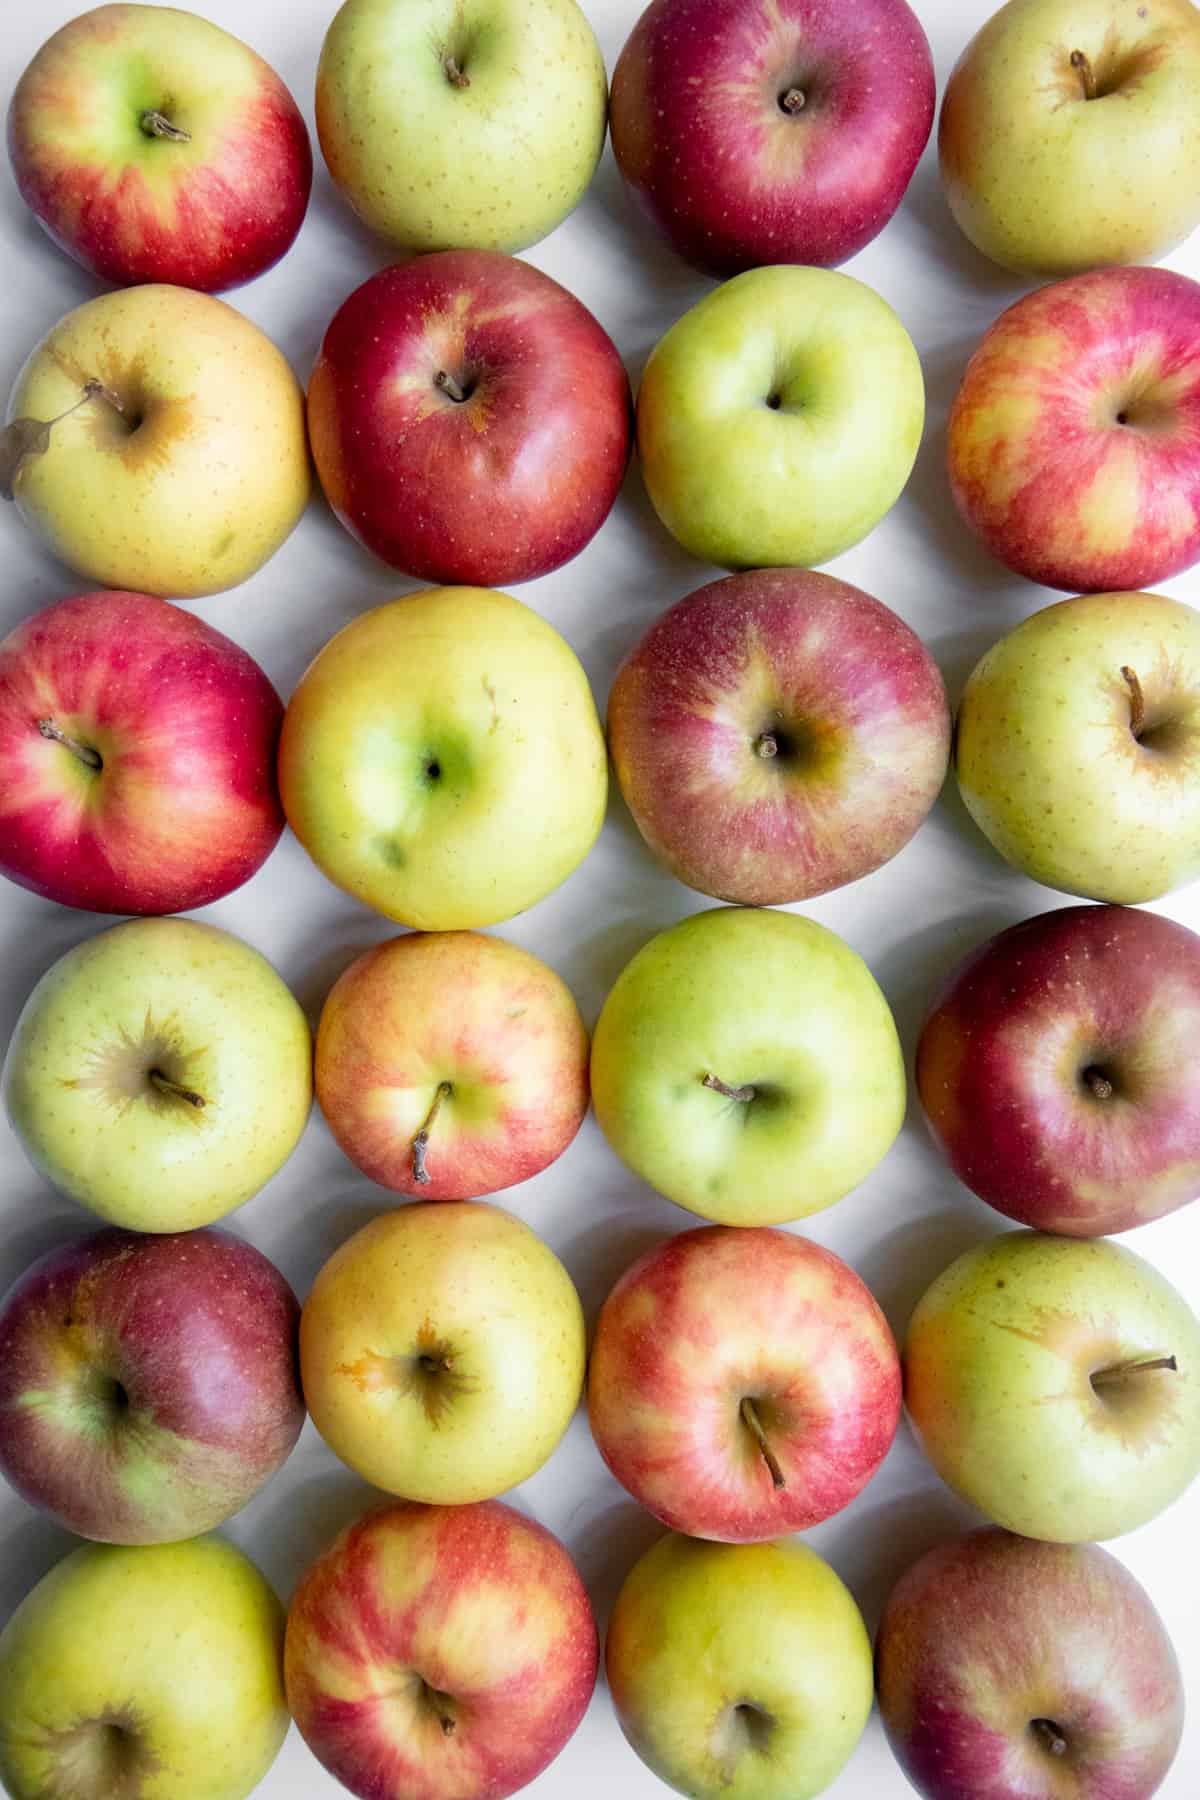 Red, yellow, and green apples are arranged in rows, ready for storage.